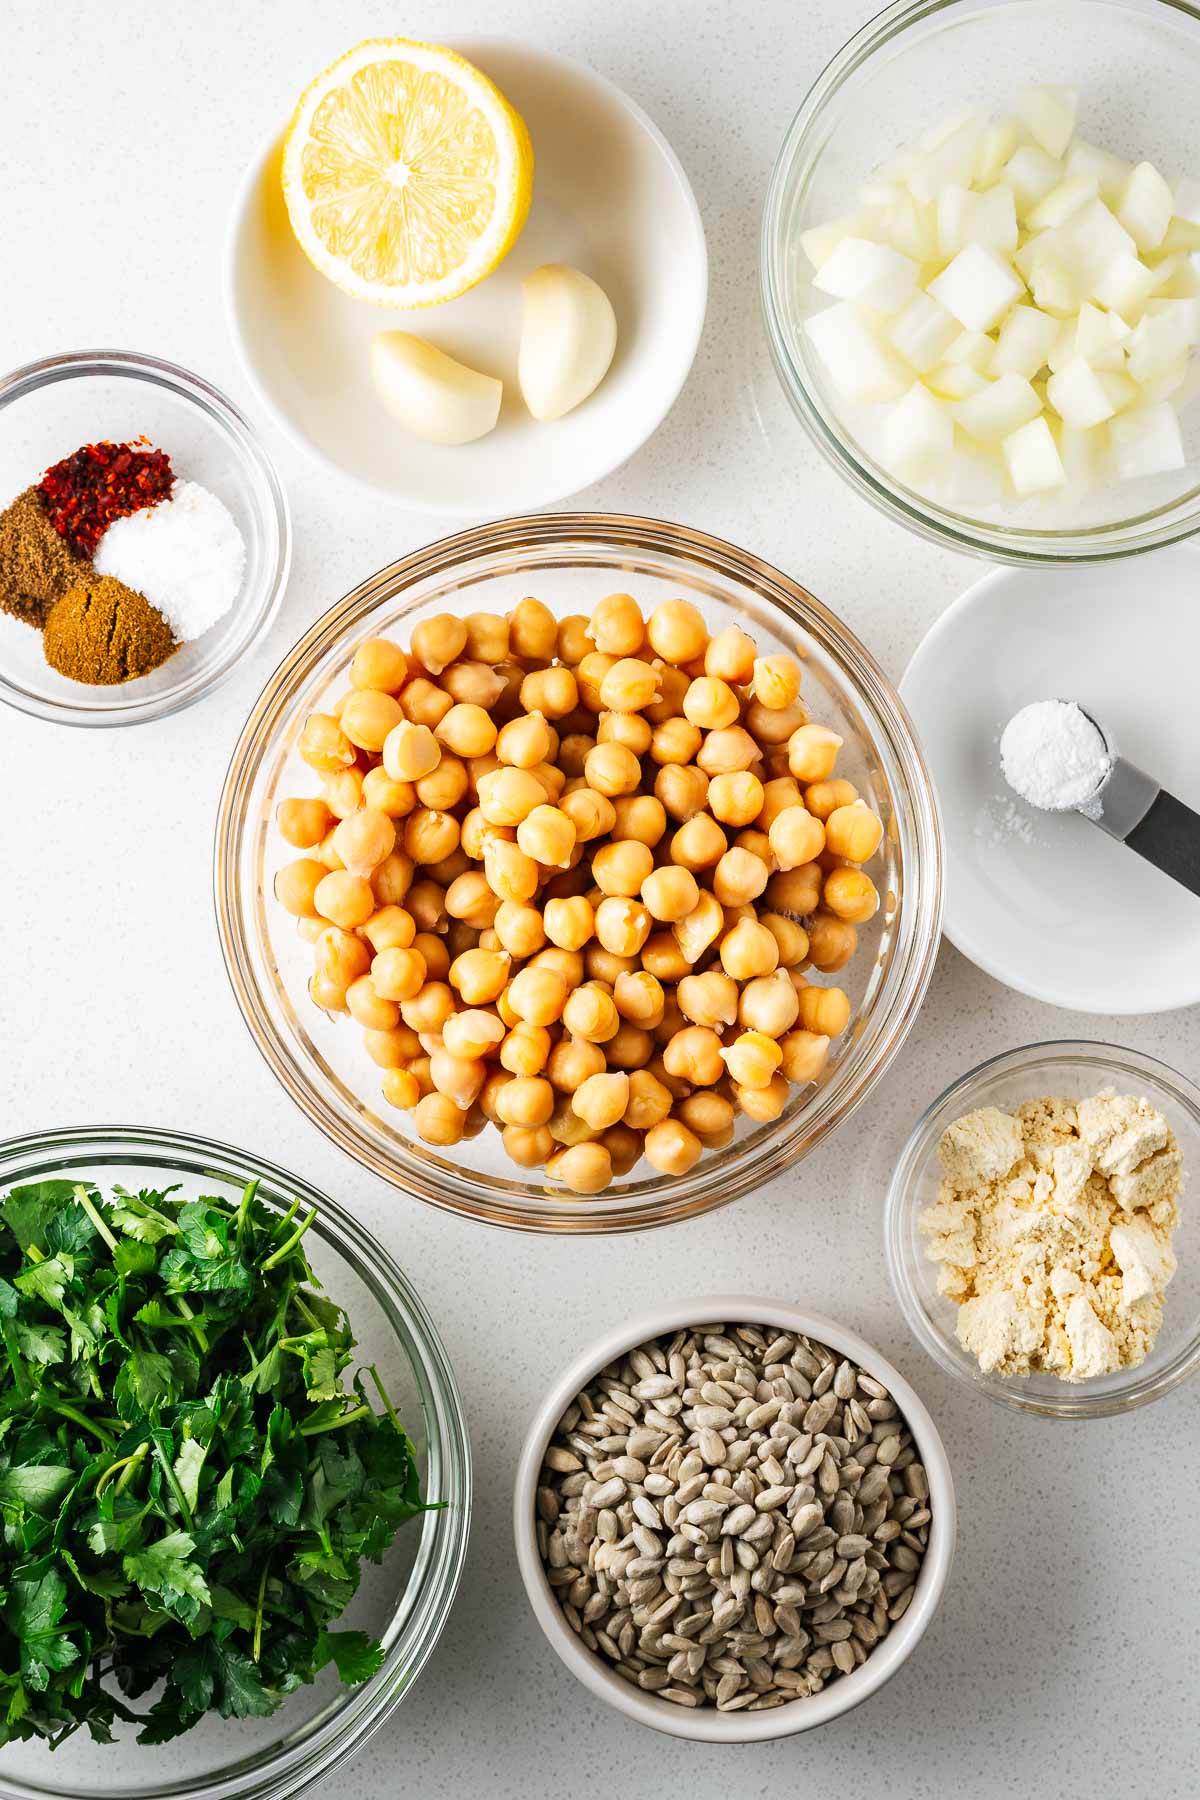 Ingredients for the baked falafel recipe using canned chickpeas arranged on a white kitchen counter viewed from above.